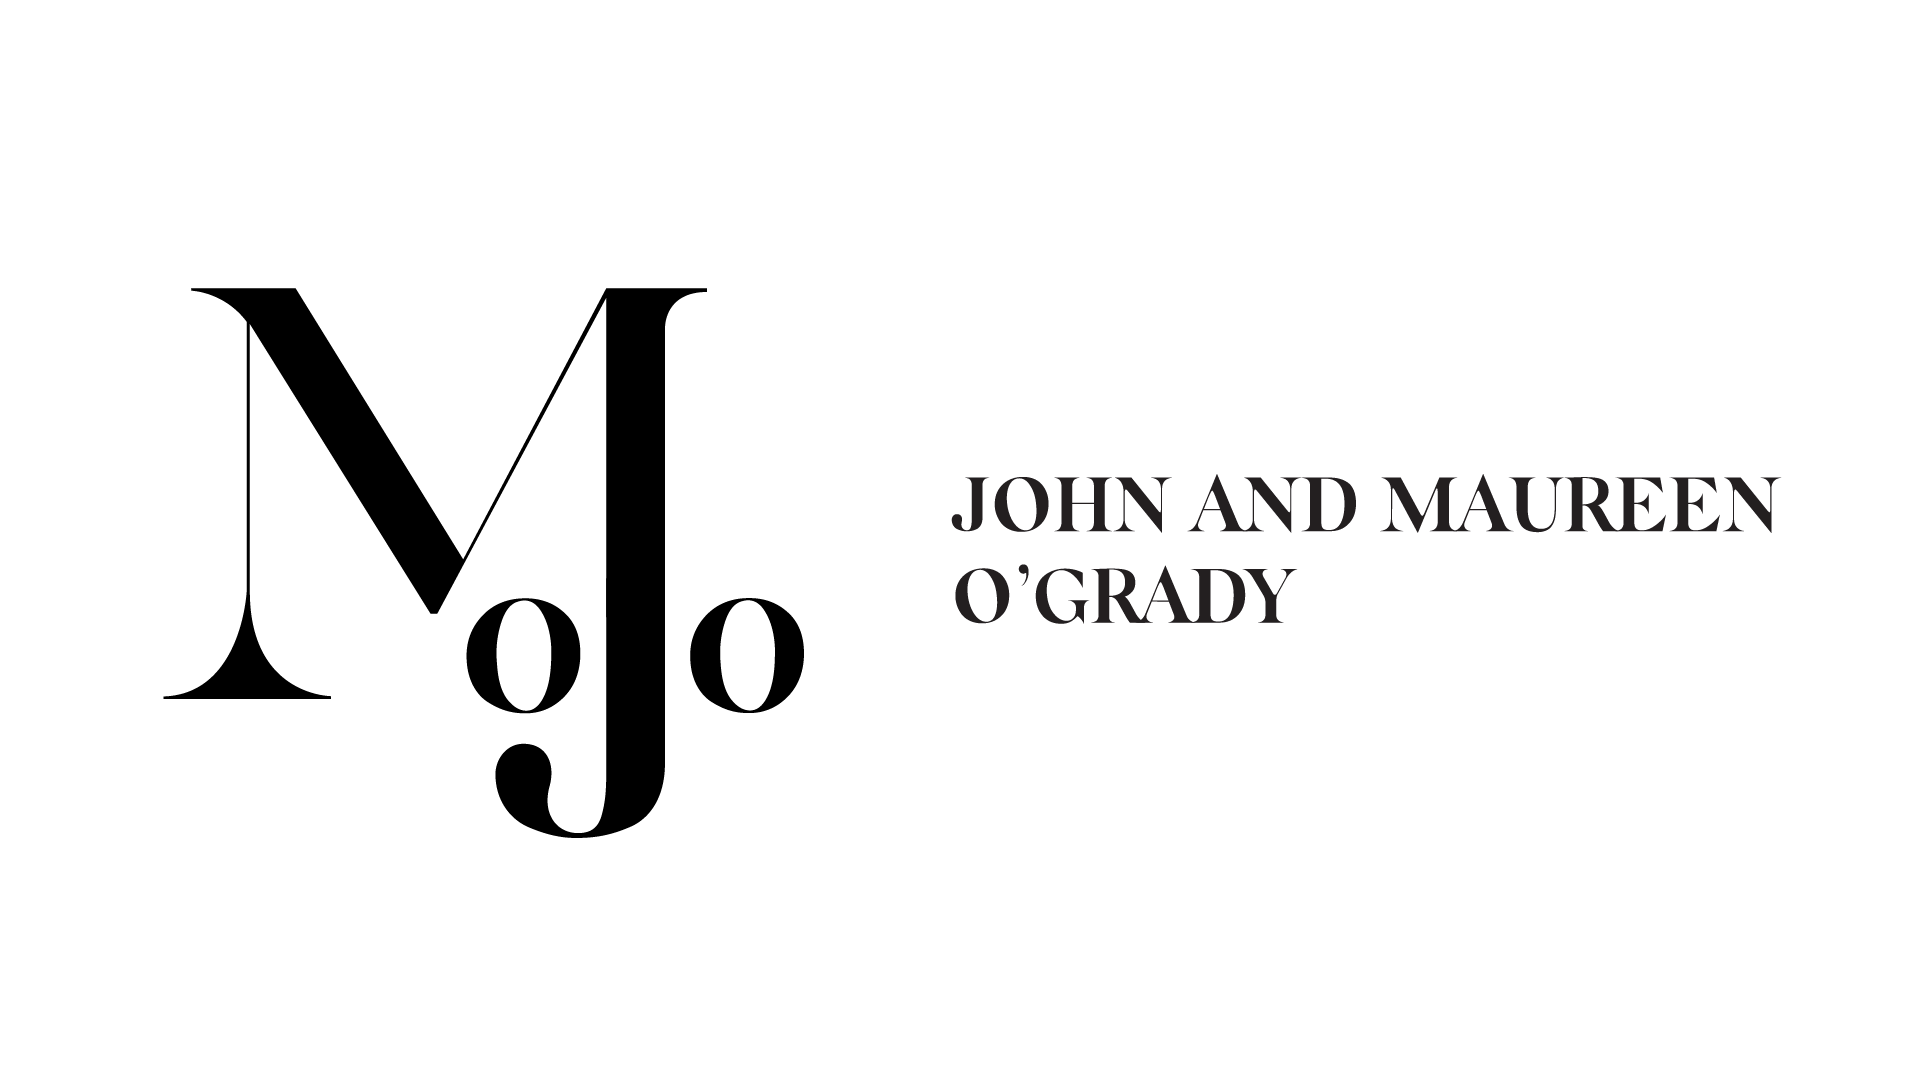 A text banner featuring the names John and Maureen.